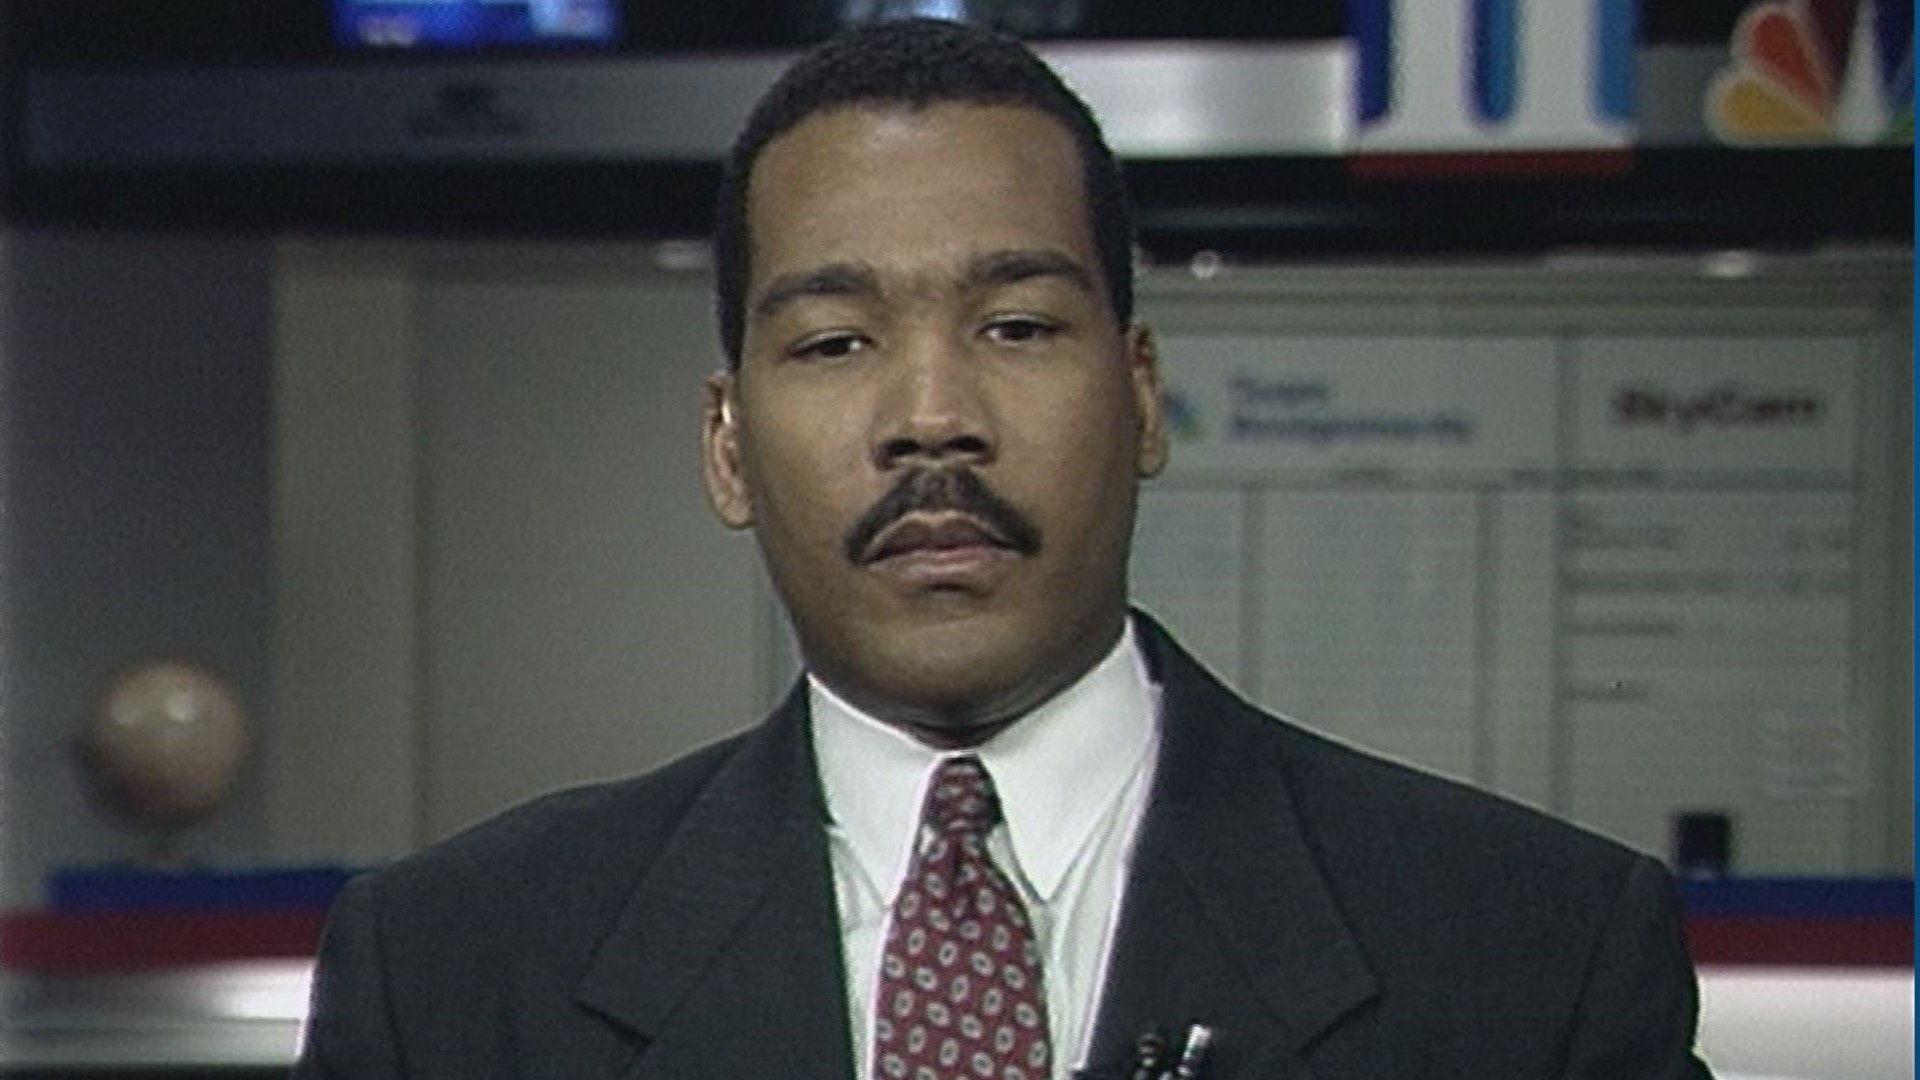 Video of Dexter Scott King from the 11Alive archives. King, MLK's youngest son, died Monday at 62.